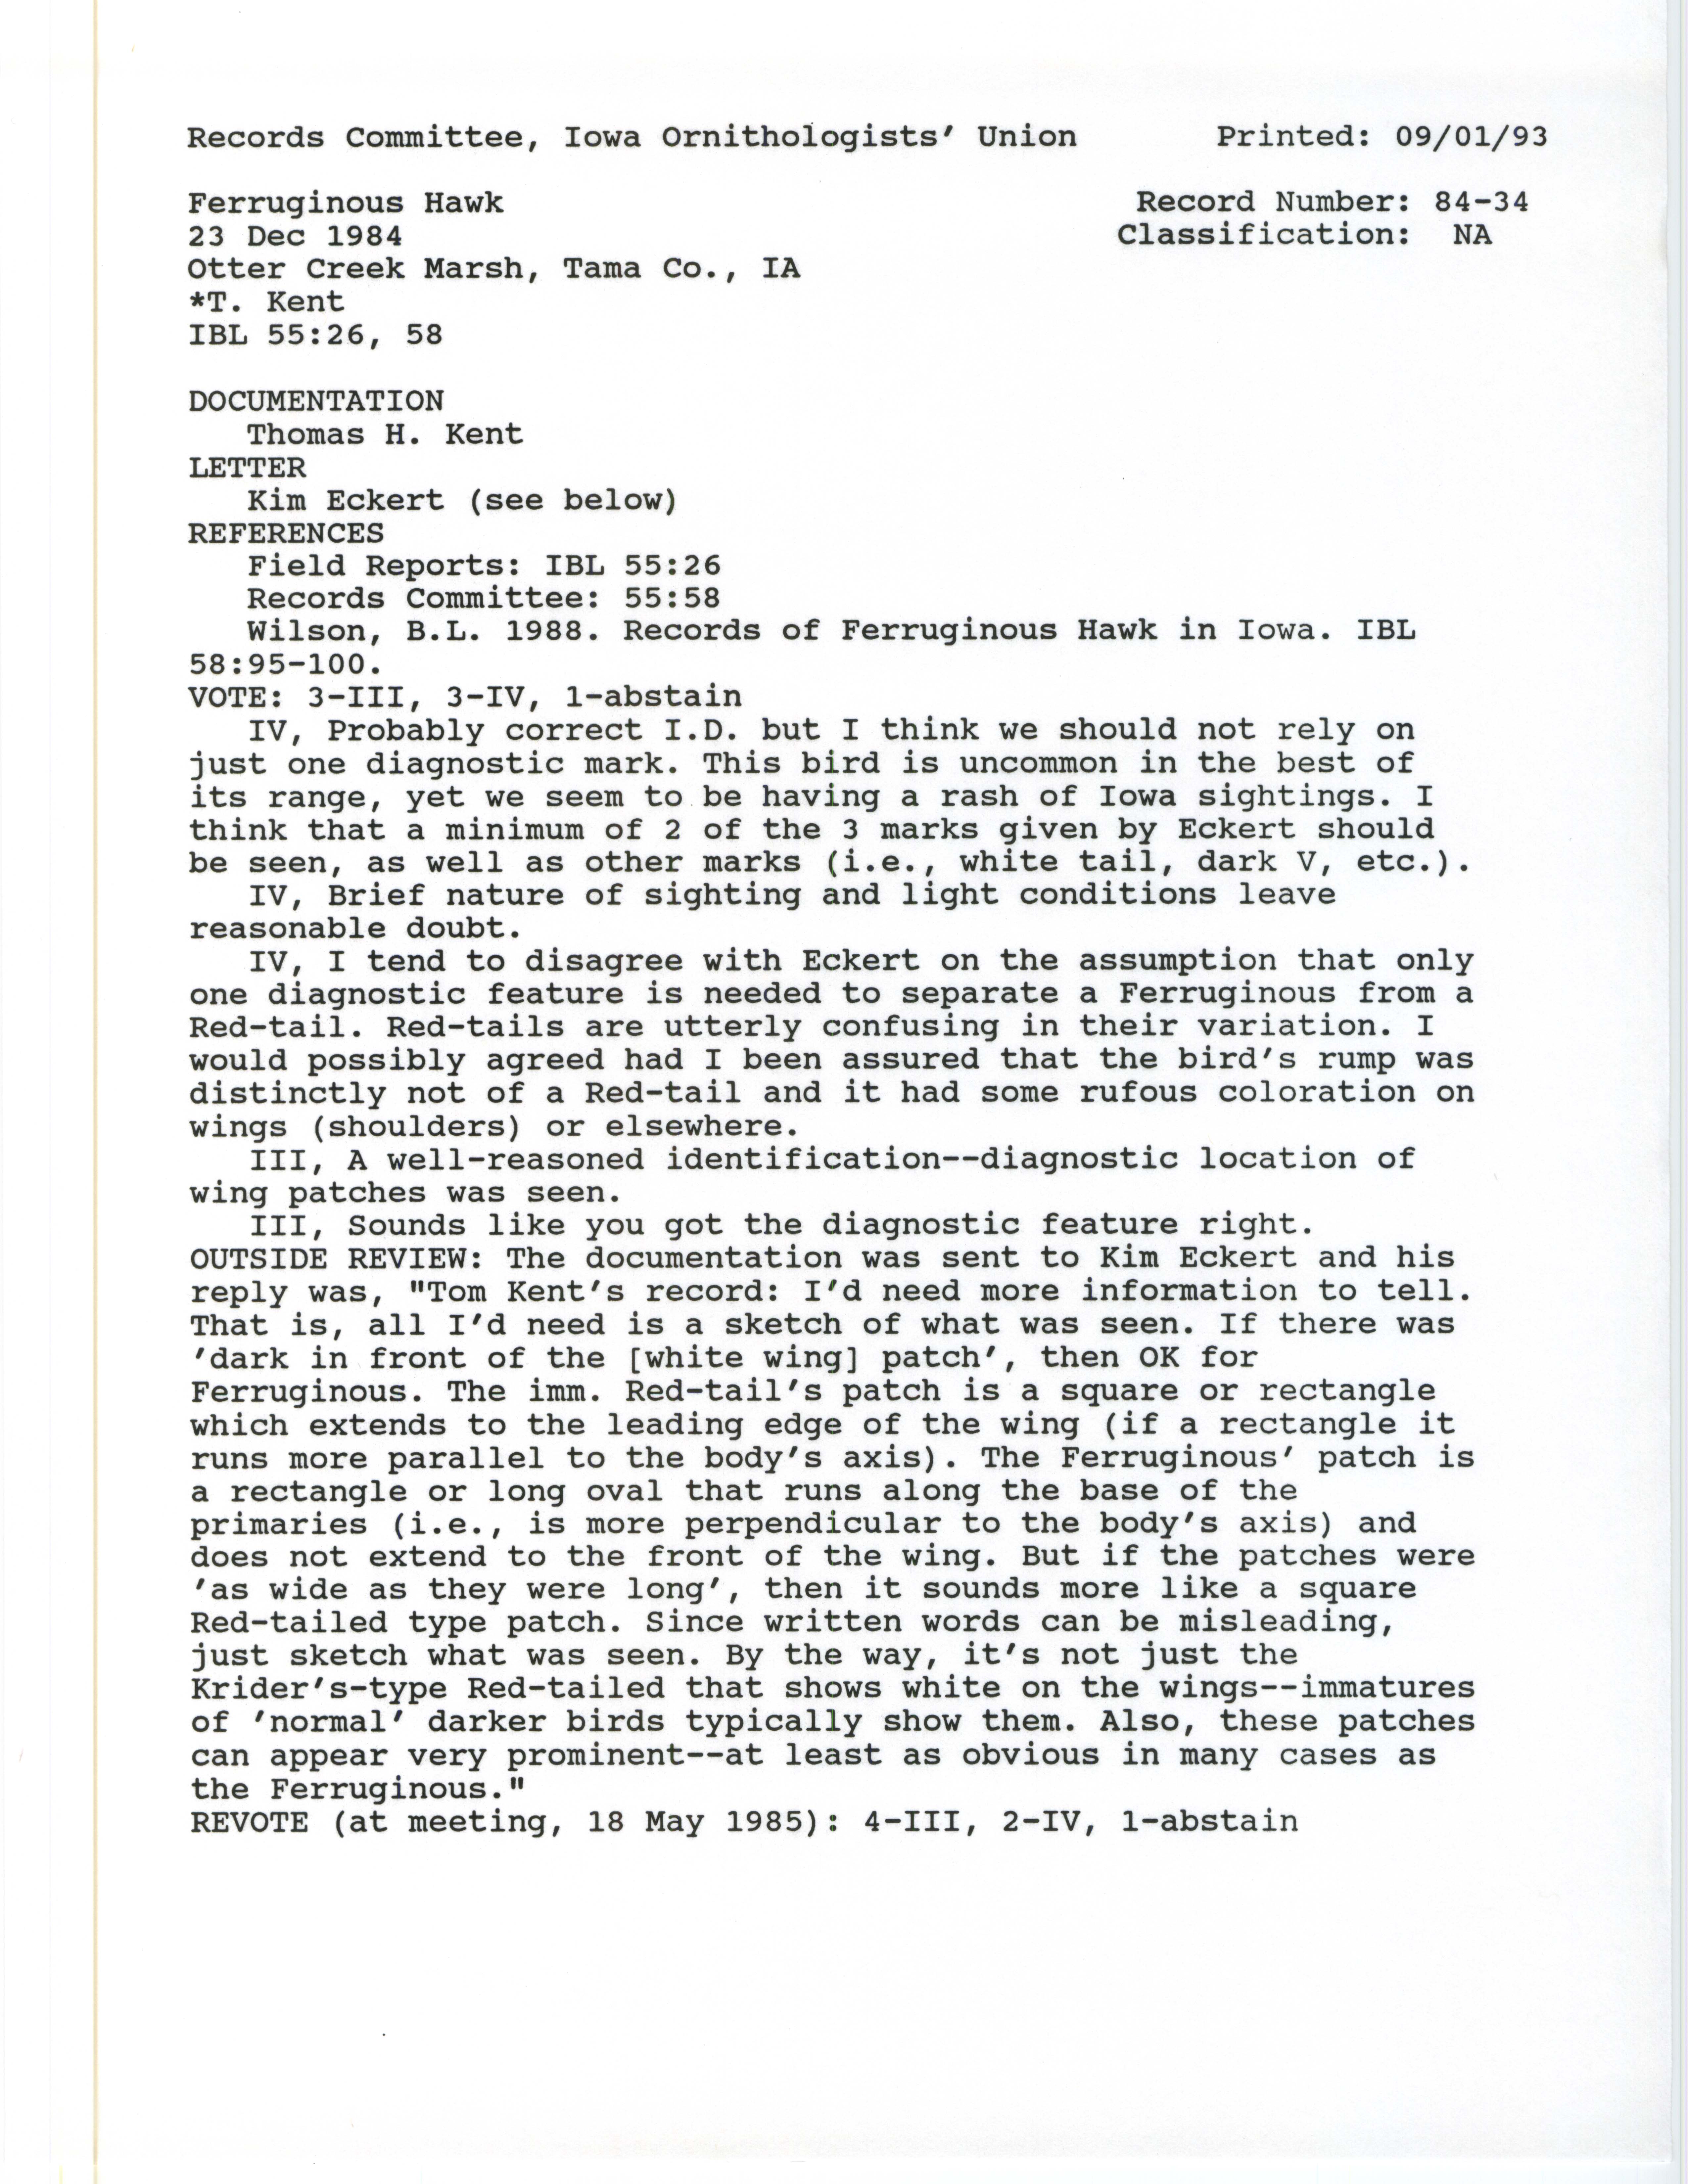 Records Committee review for rare bird sighting of Ferruginous Hawk at Otter Creek Marsh, 1984